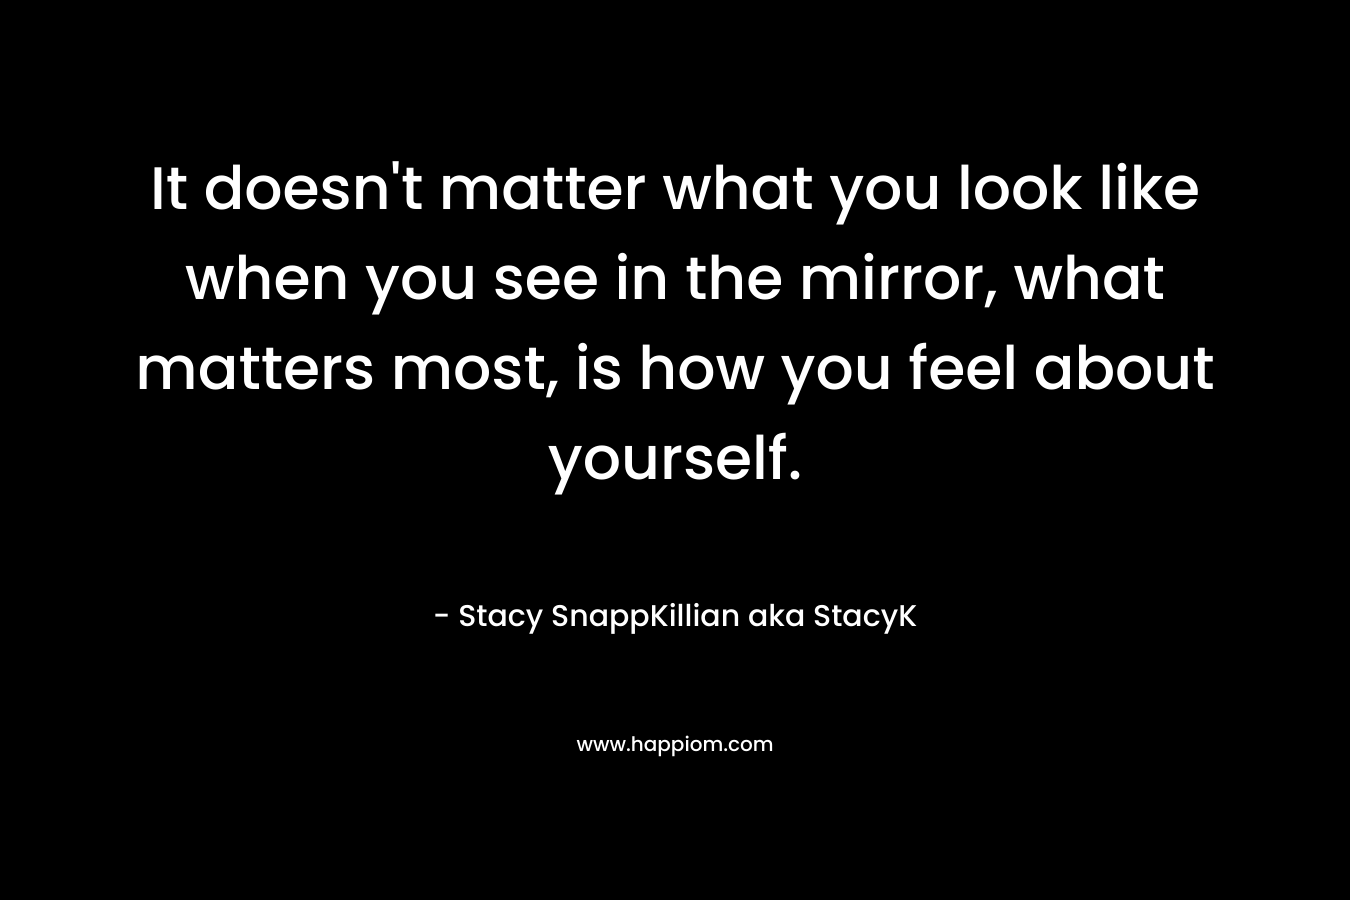 It doesn’t matter what you look like when you see in the mirror, what matters most, is how you feel about yourself. – Stacy SnappKillian aka StacyK